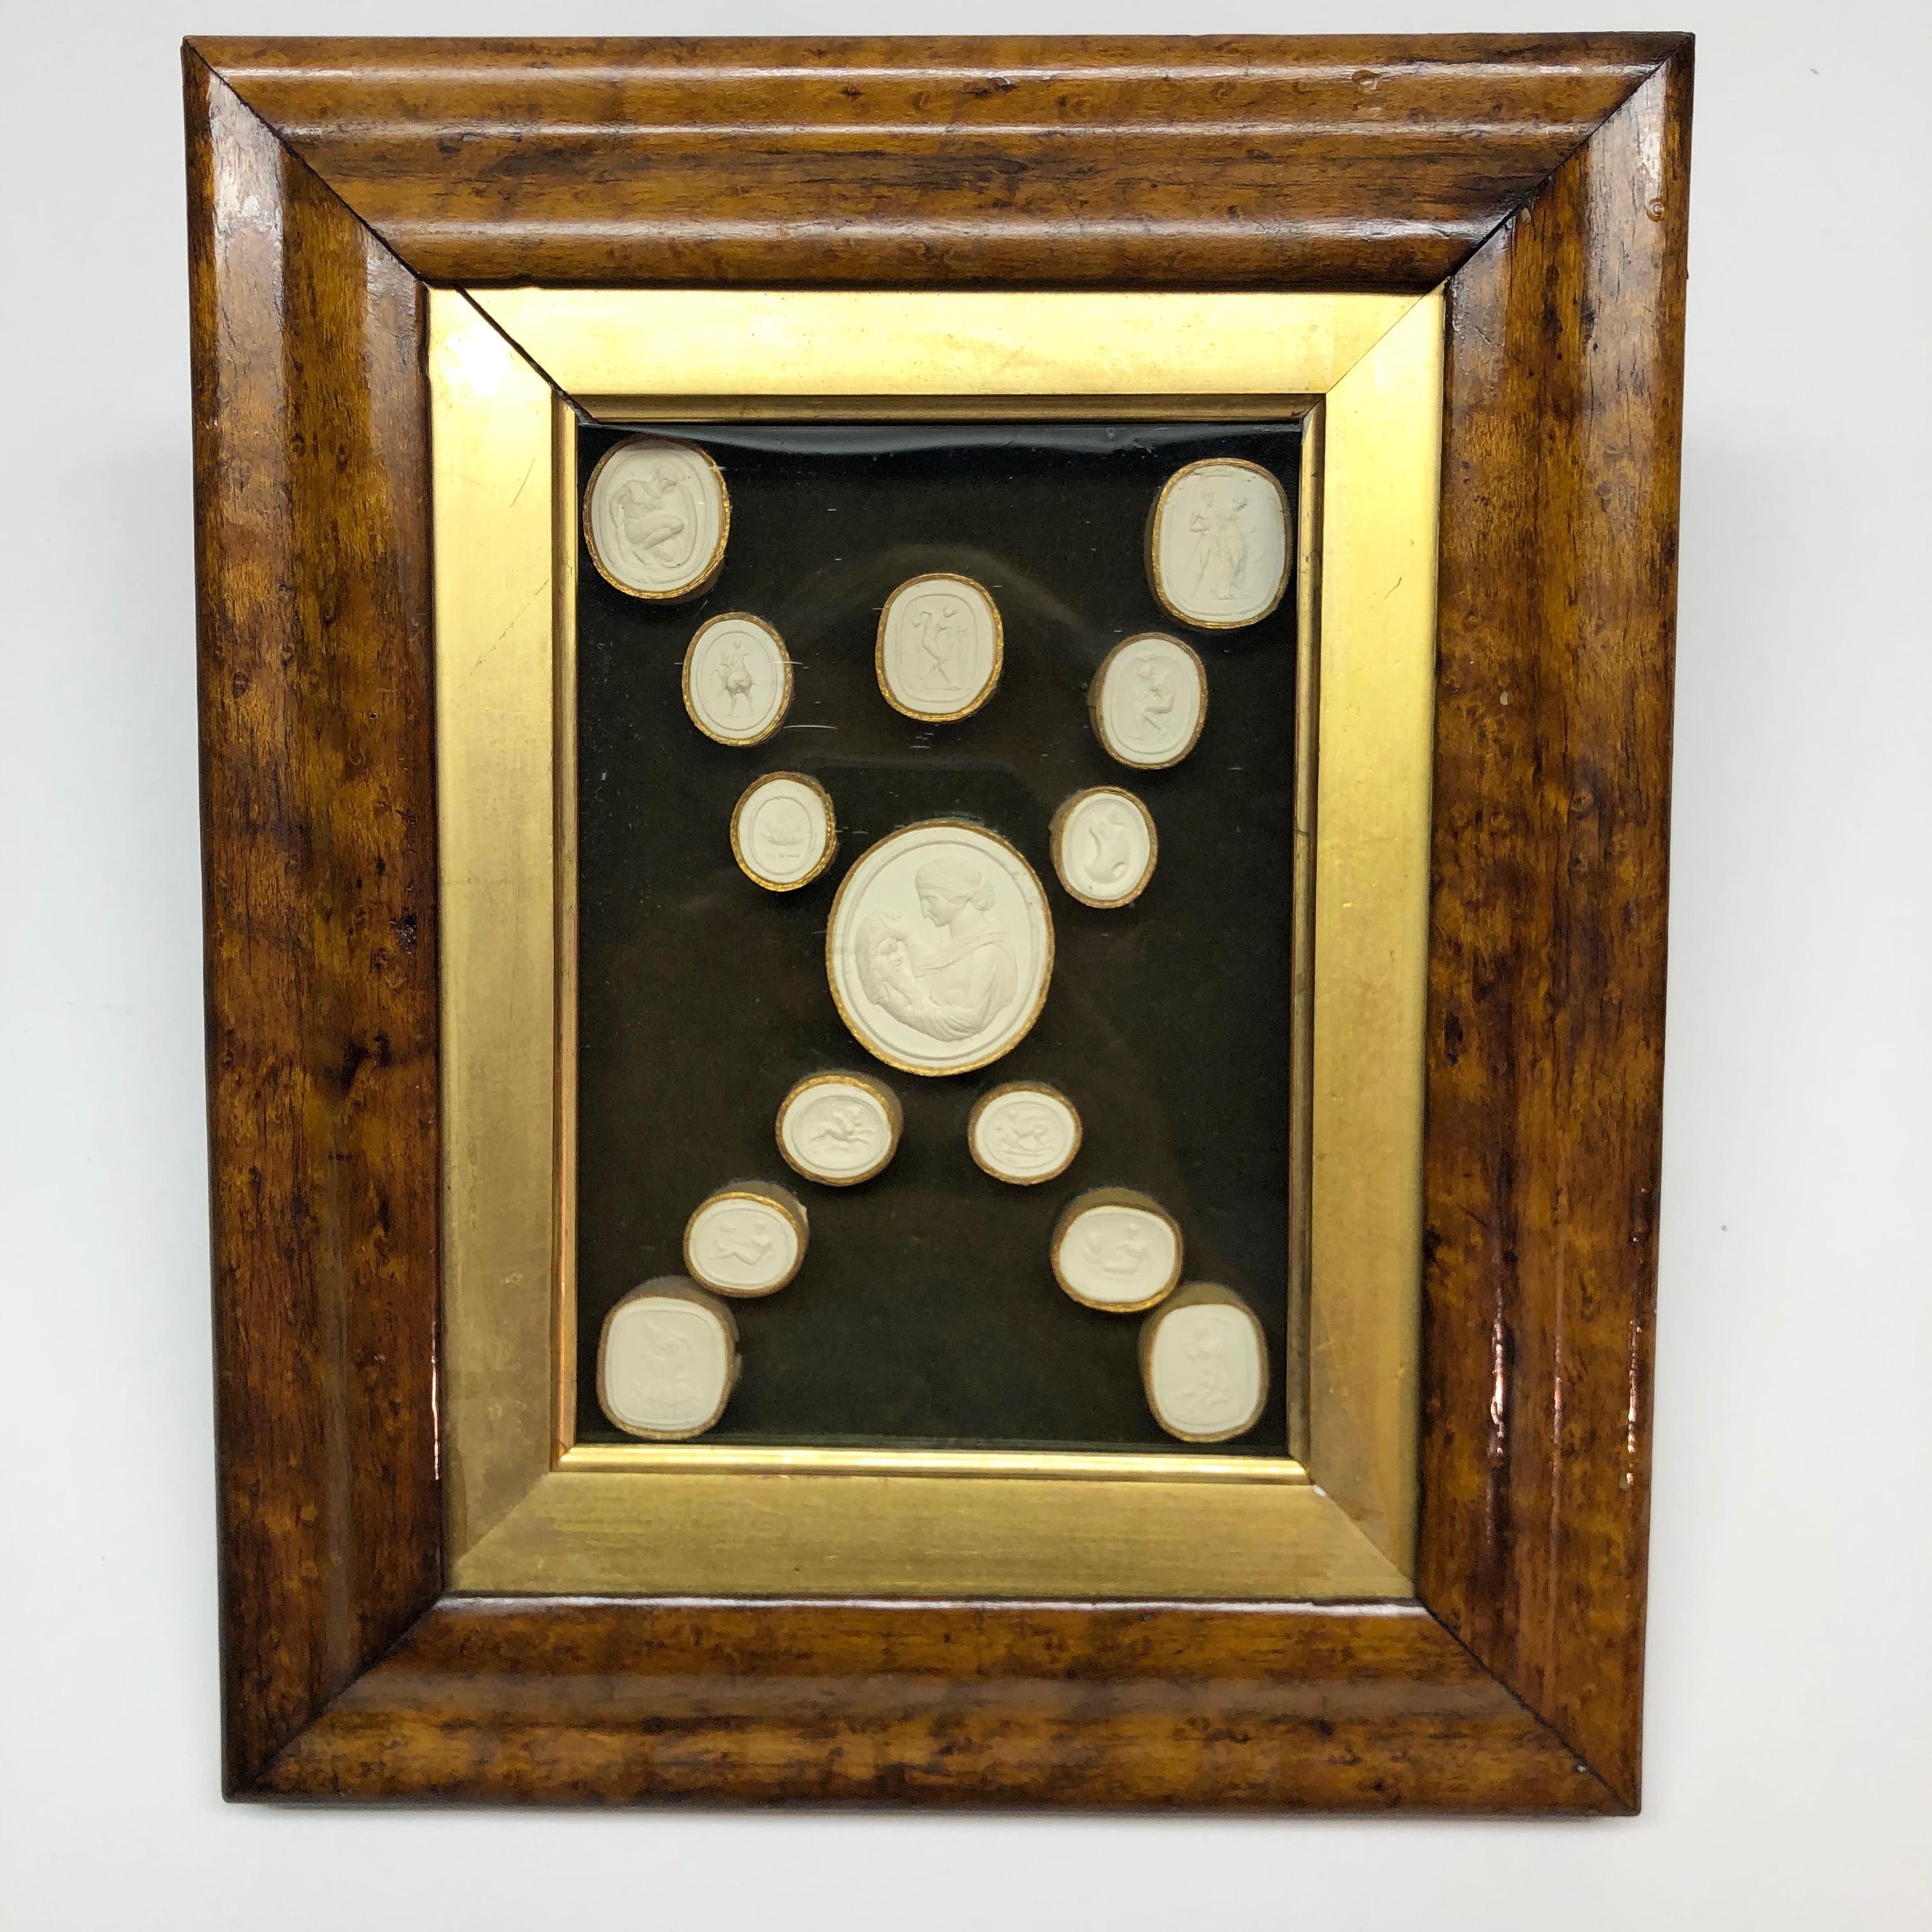 Collection of 14 Grand Tour intaglios in original fruitwood frame.